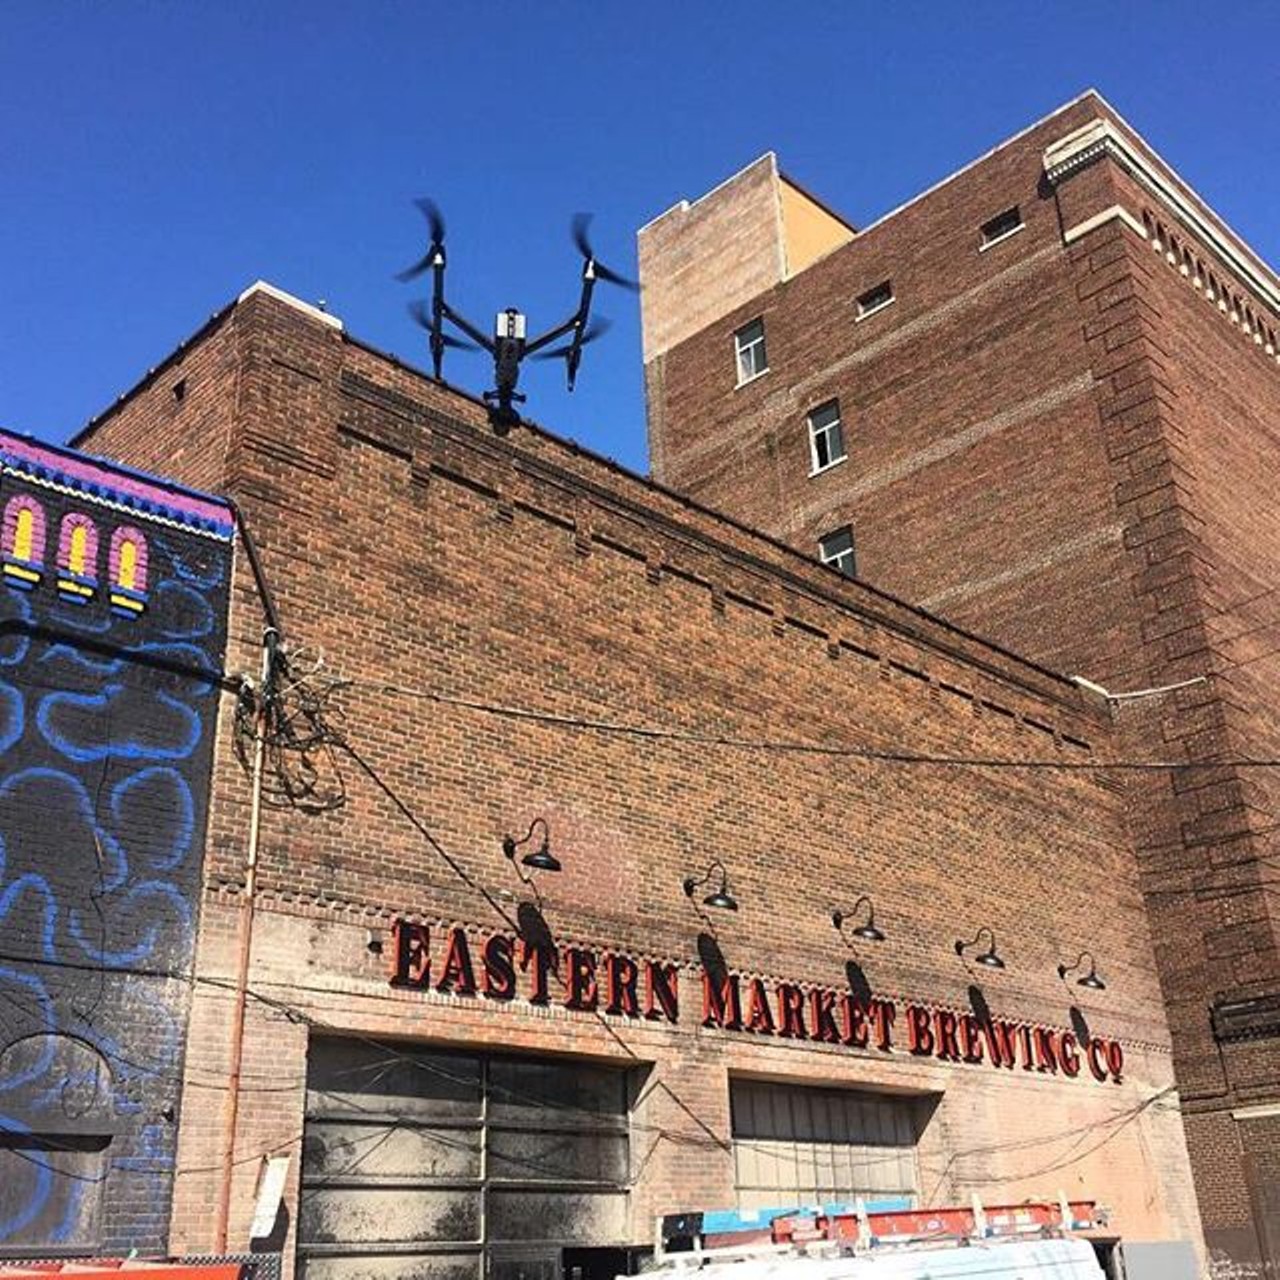 Eastern Market Brewing Co's
2515 Riopelle St., Detroit; 313-502-5165
The space including garage doors that swing up to provide an open air feel faces the street. Expect a traditional beer tap and utilized market ingredients. 
Photo via Instagram user @easternmarketbrewing